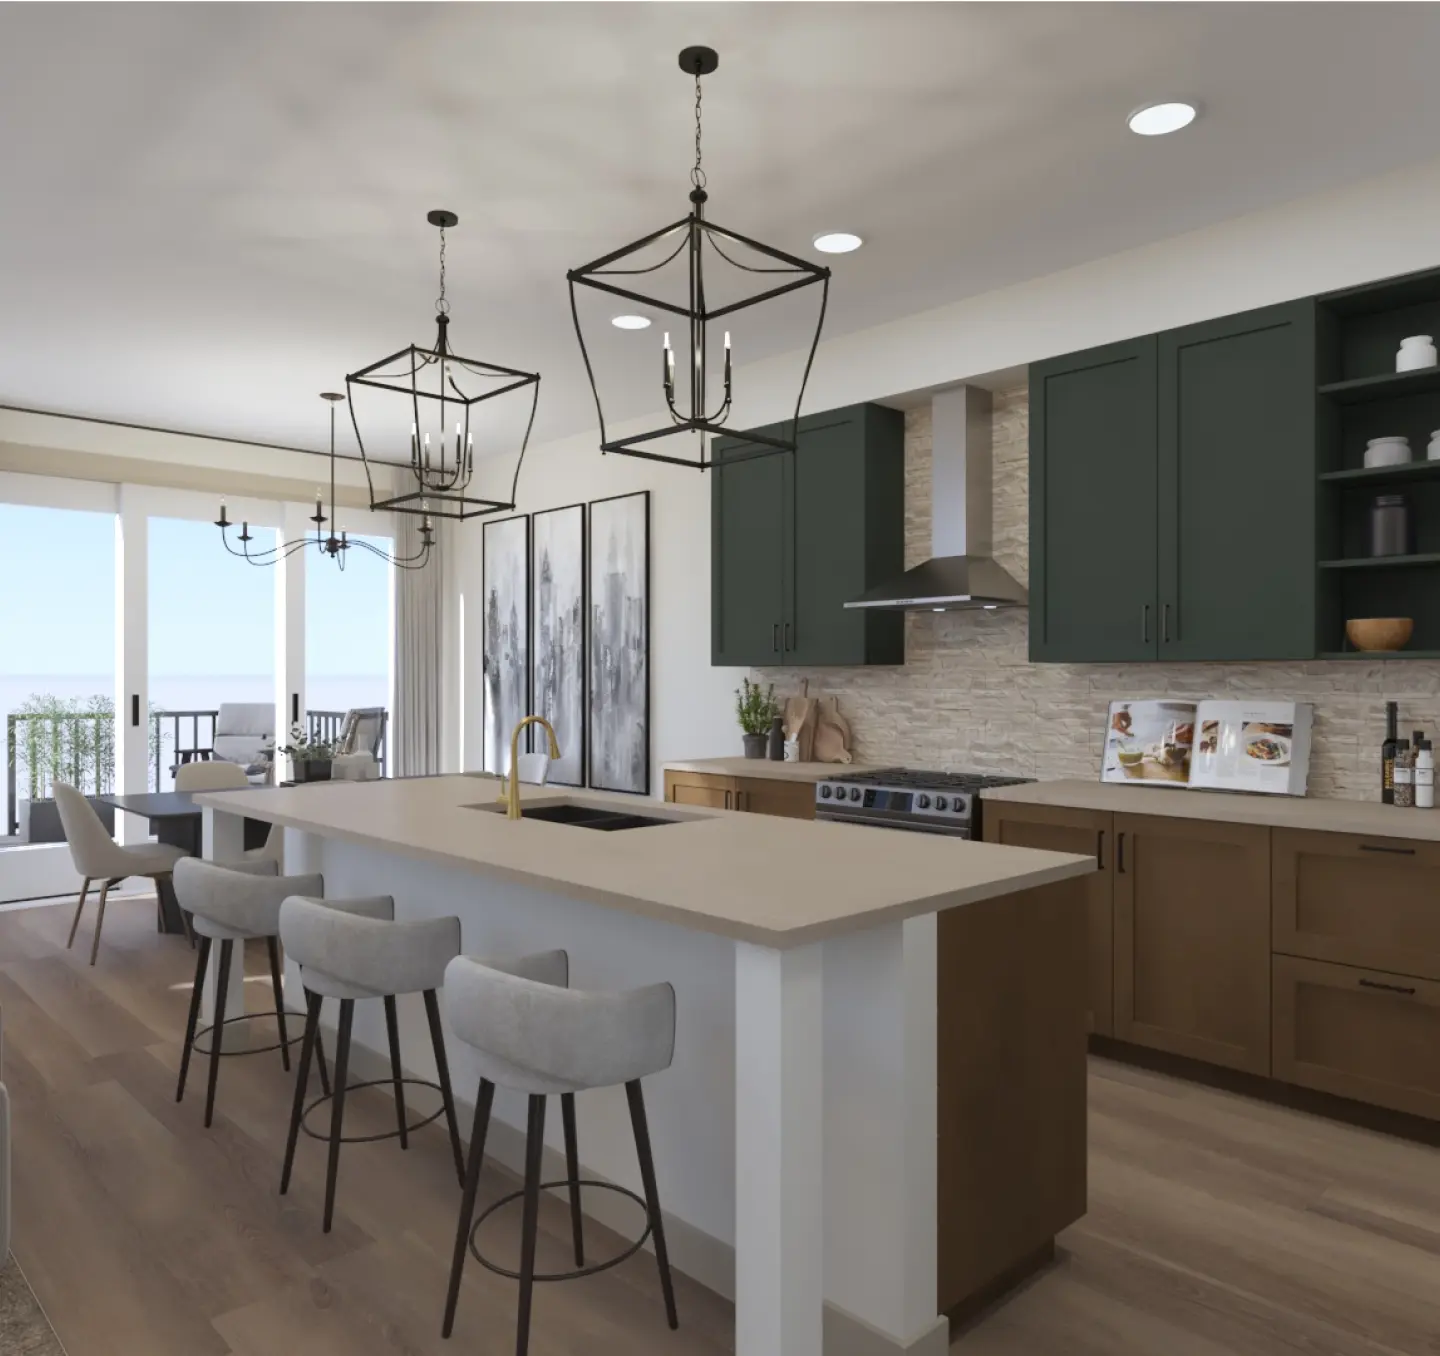 Freshly finished kitchen featuring stylish cabinetry, granite countertops, and stainless steel appliances, creating a modern and inviting culinary space.